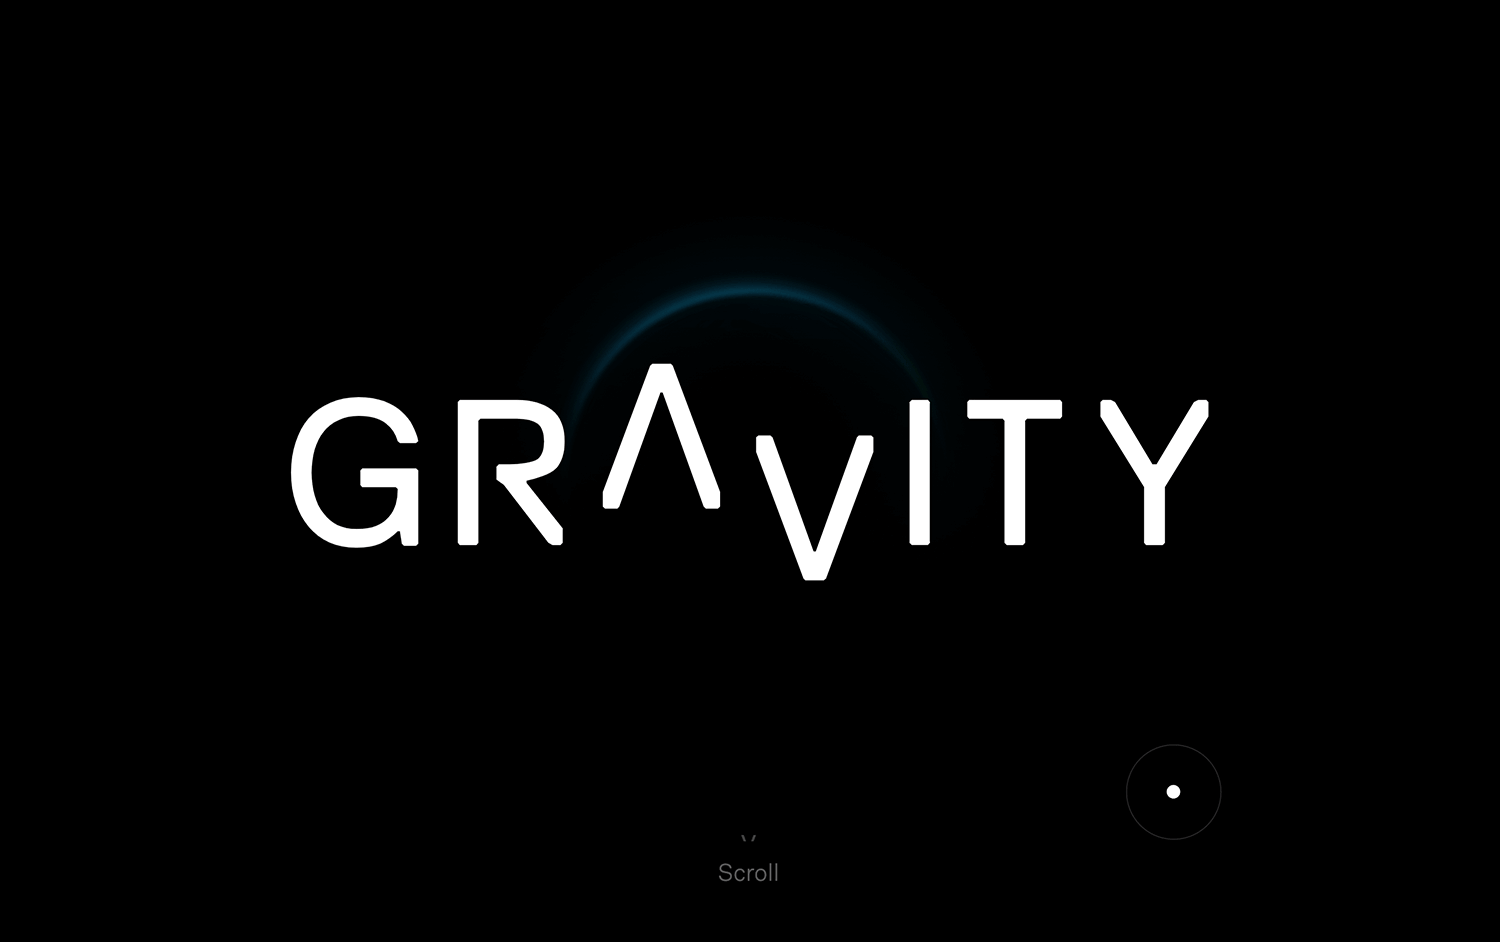 Gravity one-page website with black background and glowing text